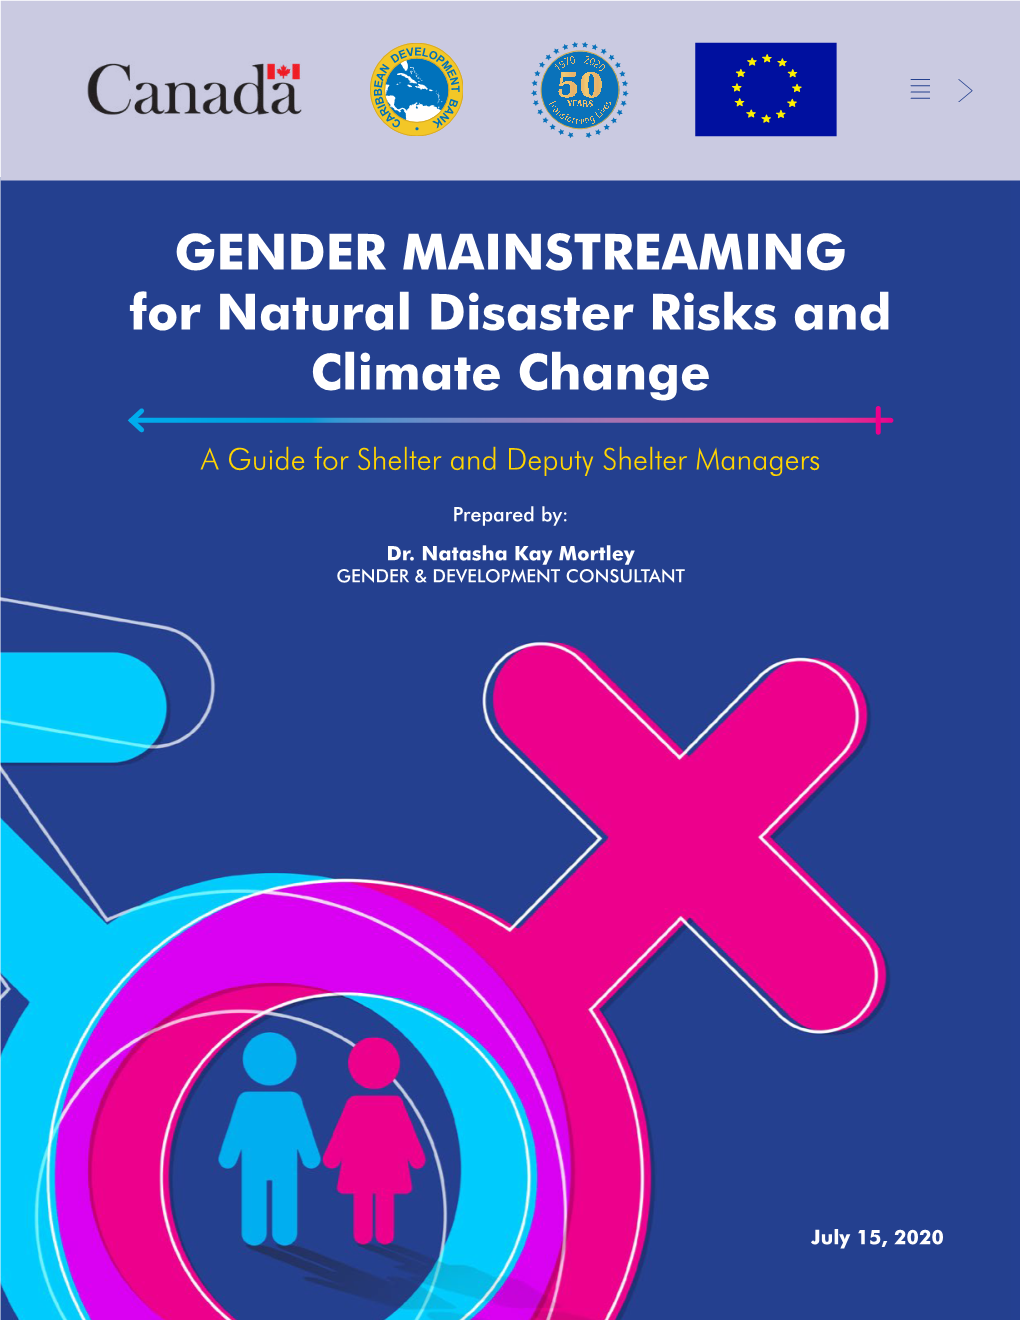 GENDER MAINSTREAMING for Natural Disaster Risks and Climate Change